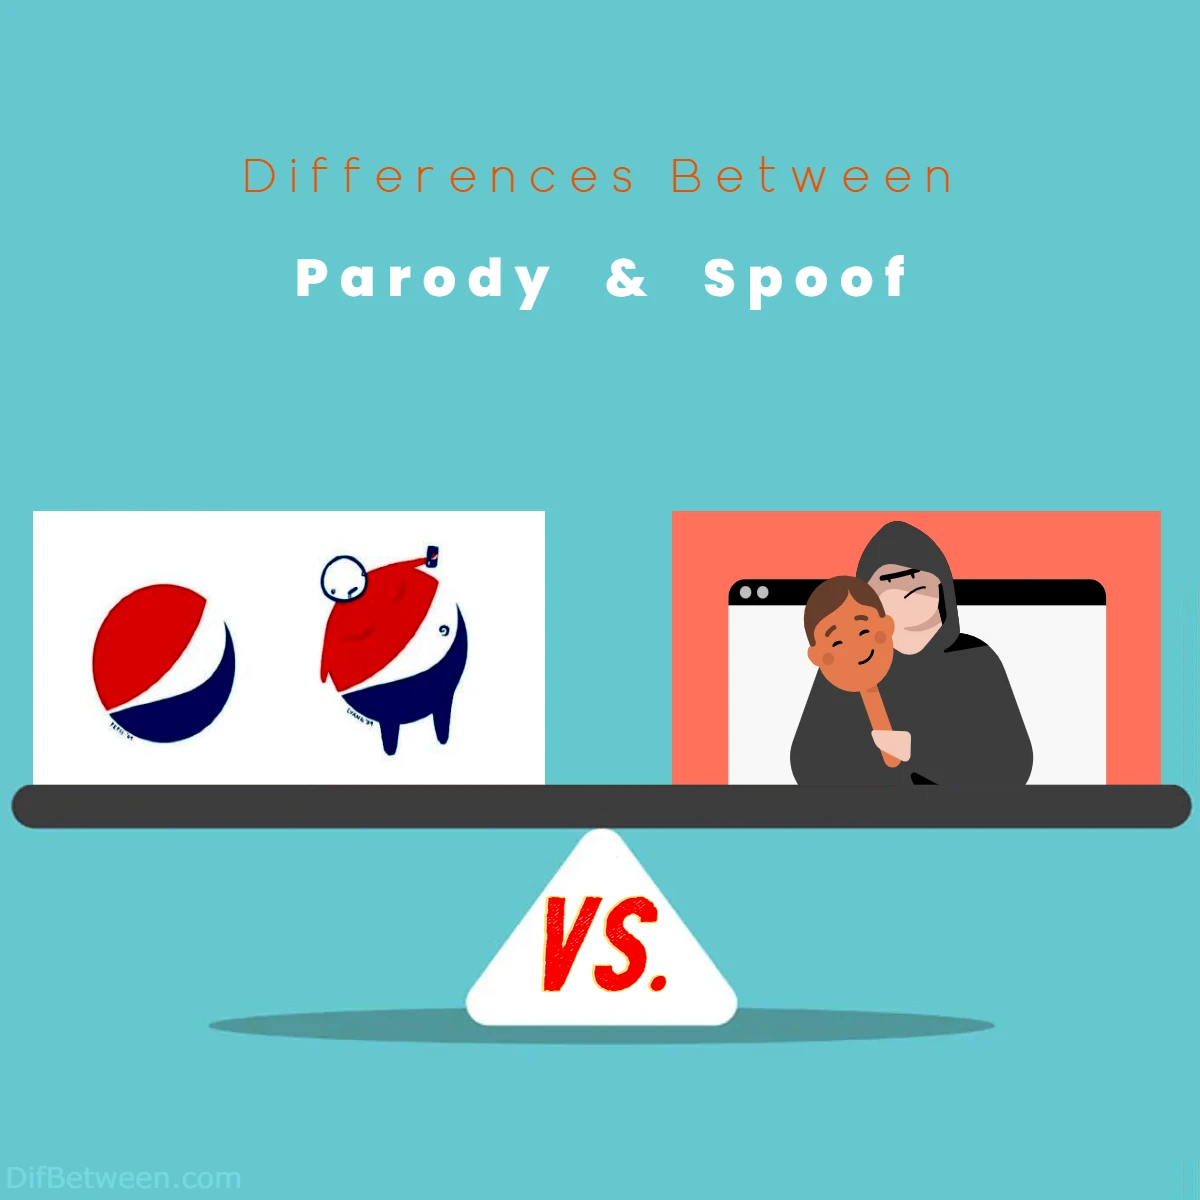 Differences Between Parody vs Spoof